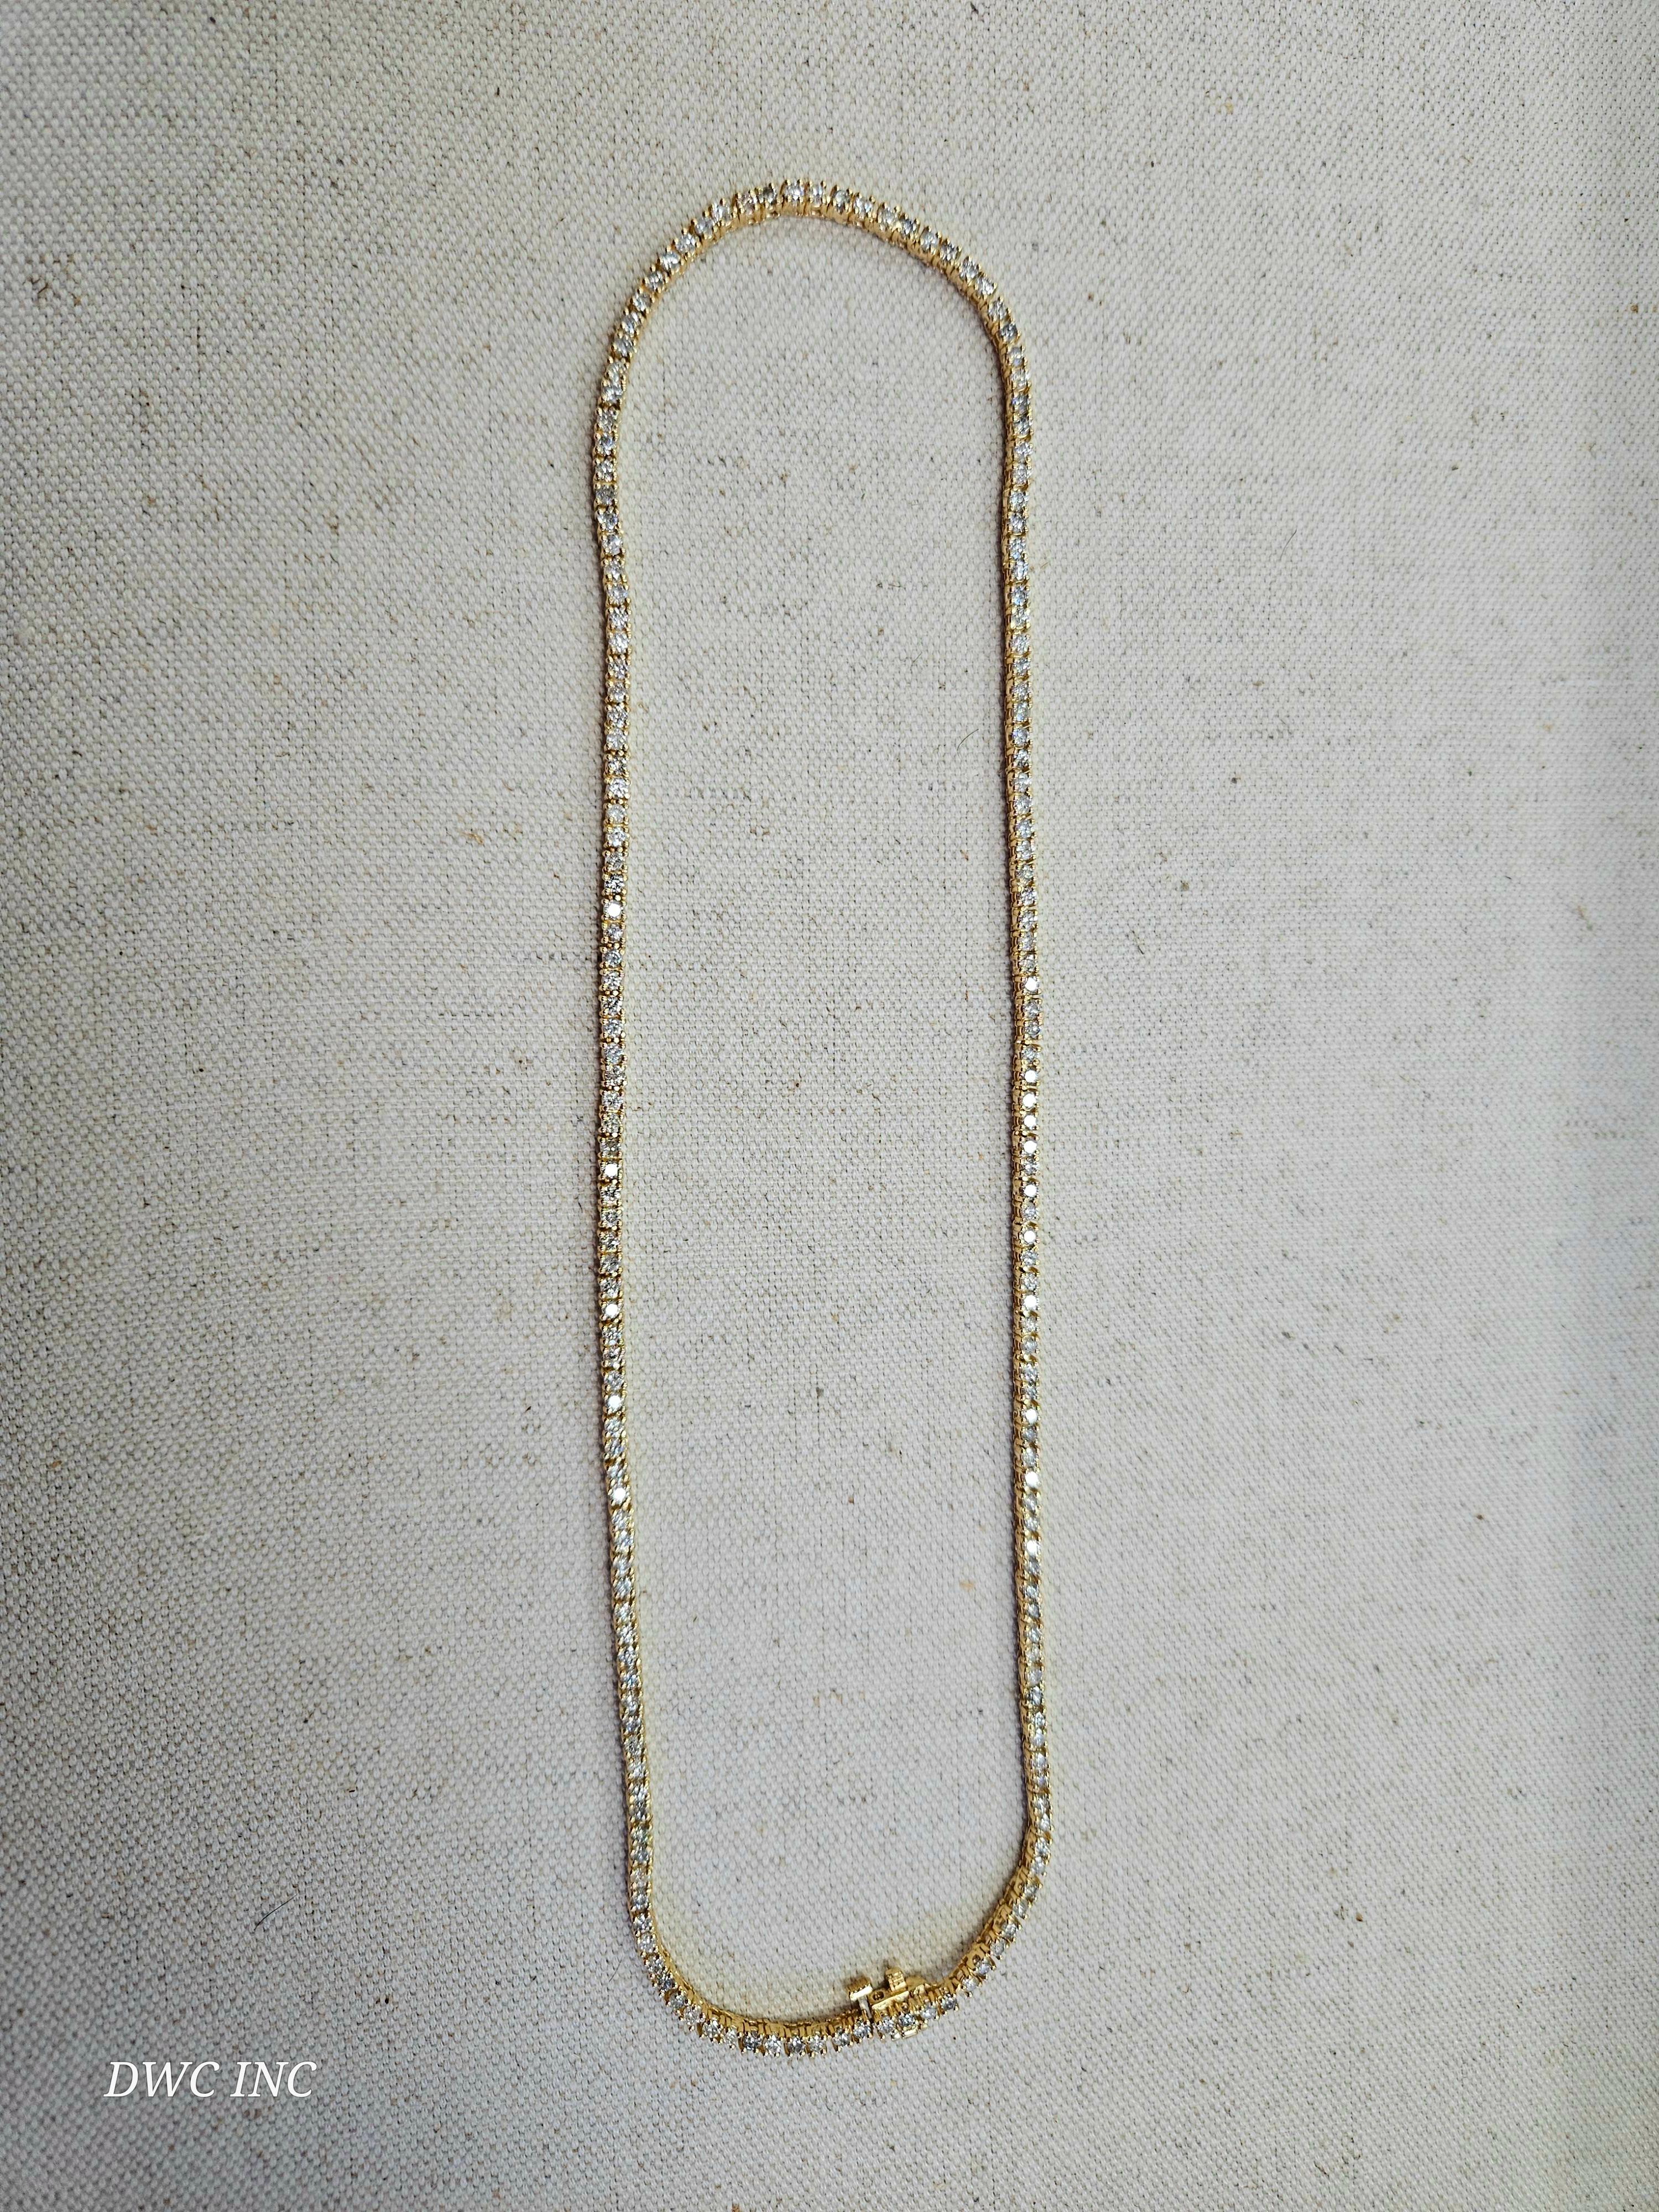 6.90 Carat Brilliant Cut Diamond Tennis Necklace 14 Karat yellow Gold 17'' In New Condition For Sale In Great Neck, NY